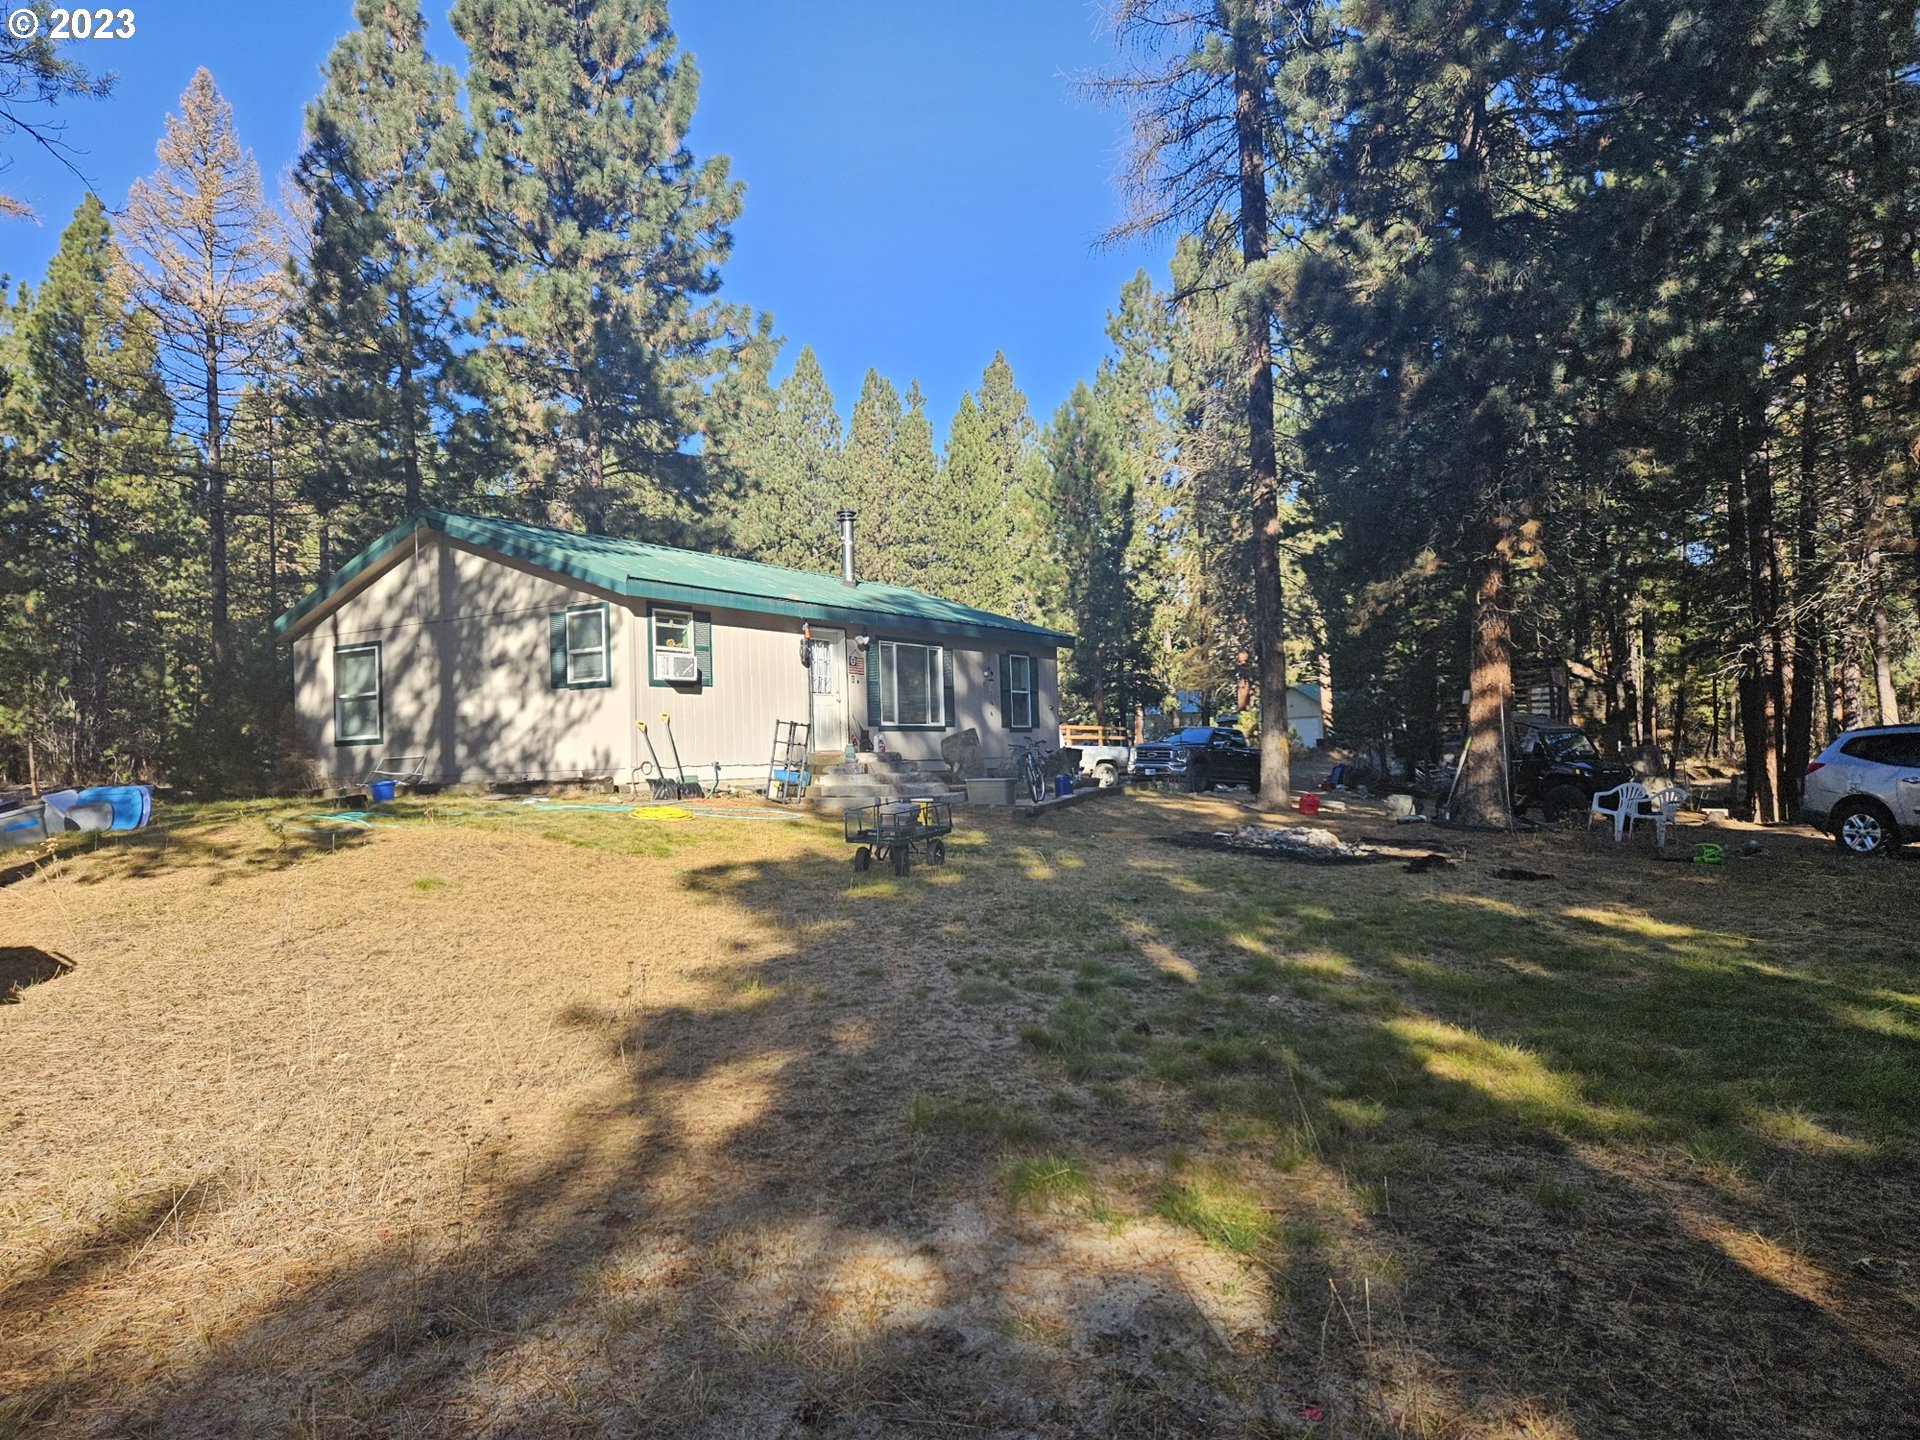 Small 3bed 2 bath manufactured home that sits above the road on 0.94-acre lot with a 36x40 SQFT shop with a graveled floor that has 14ft walls for all of your winter / summer projects. Property is in a nice, wooded area and not far off the highway for easy access. This is a must-see property.